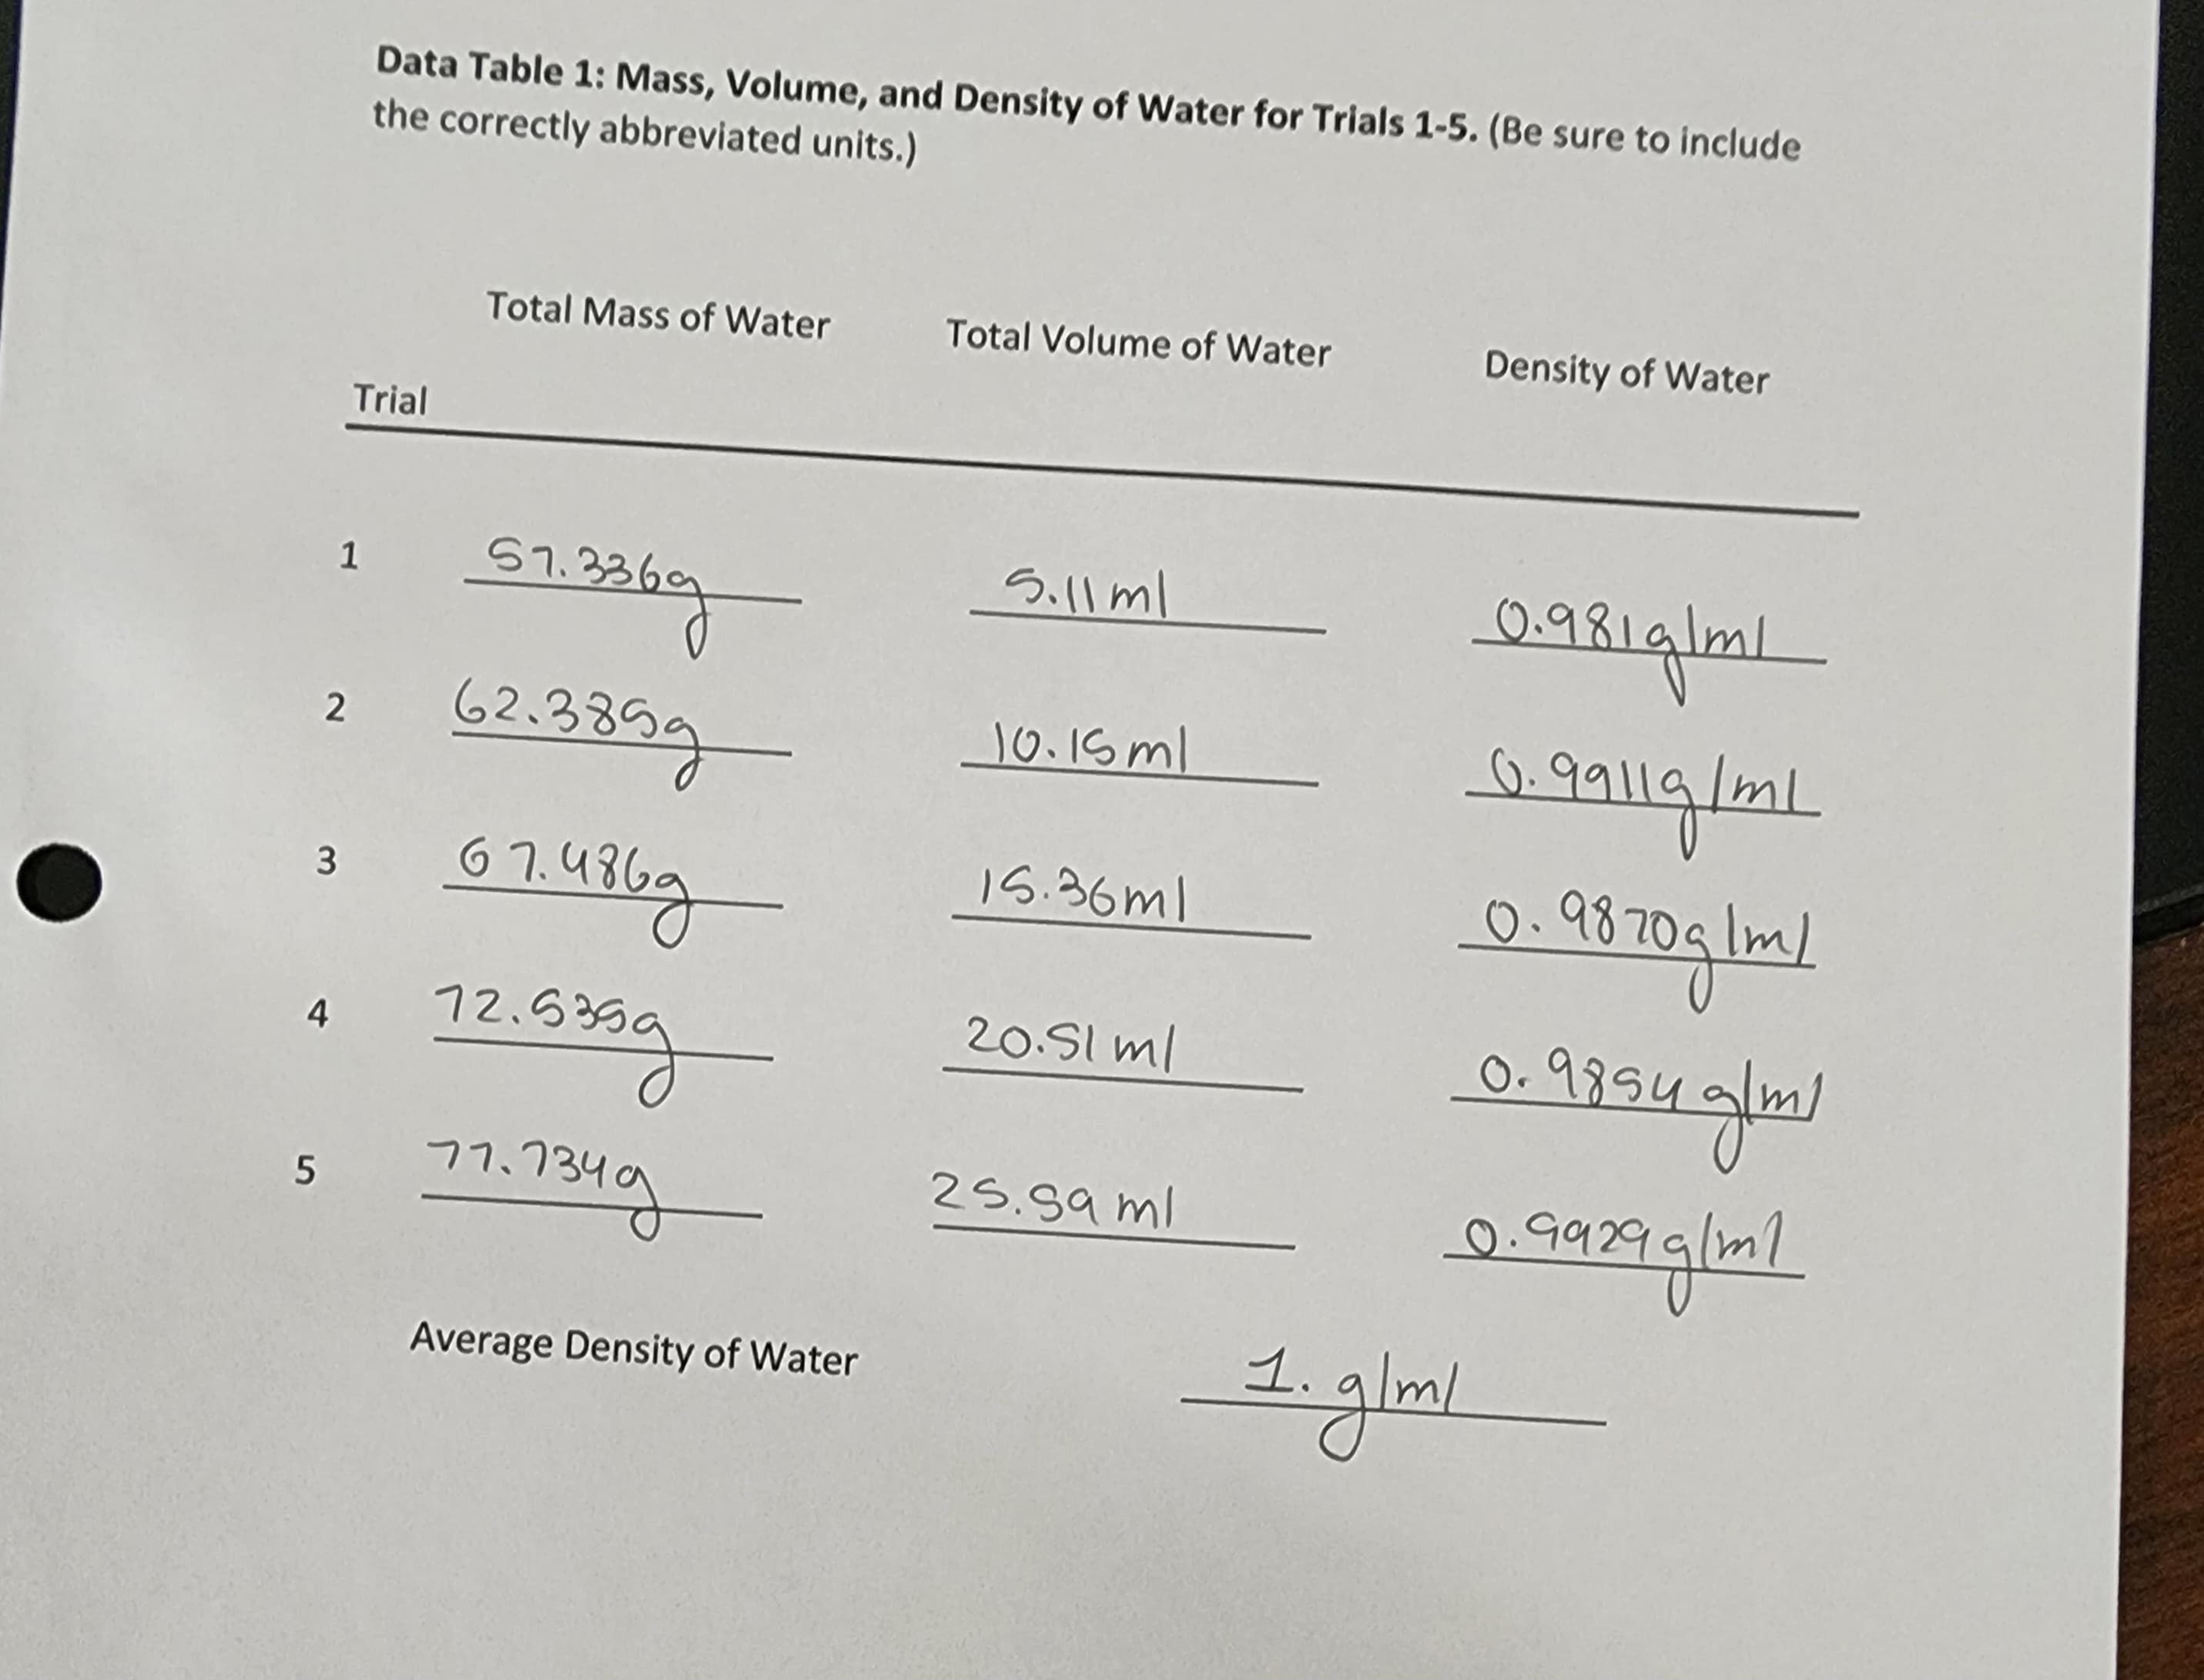 2
3
5
Data Table 1: Mass, Volume, and Density of Water for Trials 1-5. (Be sure to include
the correctly abbreviated units.)
Trial
1 57.33
Total Mass of Water Total Volume of Water
57.3369
62.3899
67.486g
72.535g
77.7349
4 72.5
Average Density of Water
5.11ml
10.15ml
15.36ml
20.5l ml
25.99 ml
1. g/ml
Density of Water
0.981g/ml
0.9911g/ml
0.9870g/m/
0.9854 g/m1
0.9929ğıml